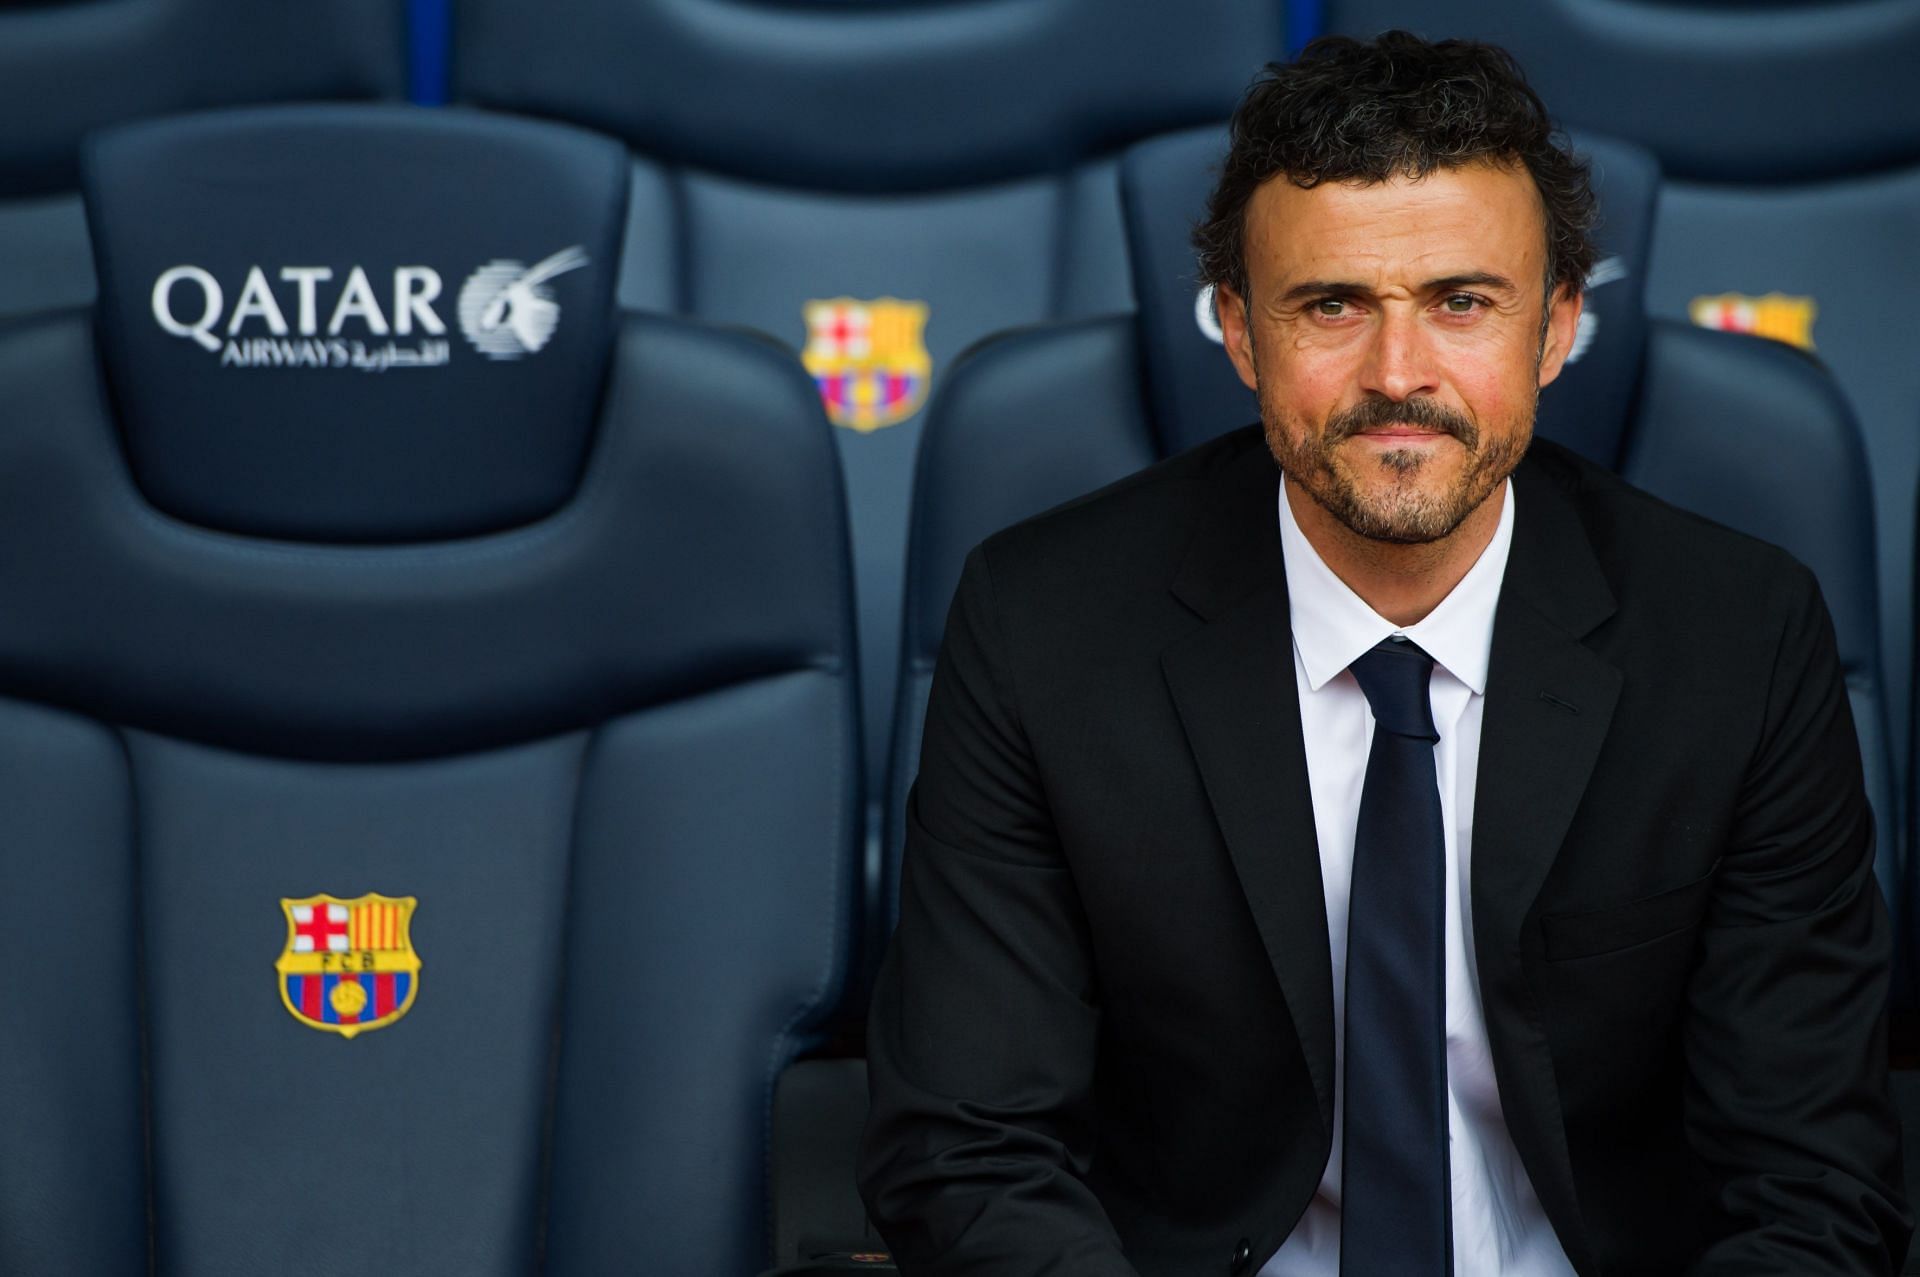 Luis Enrique is one of the most celebrated coaches in the world